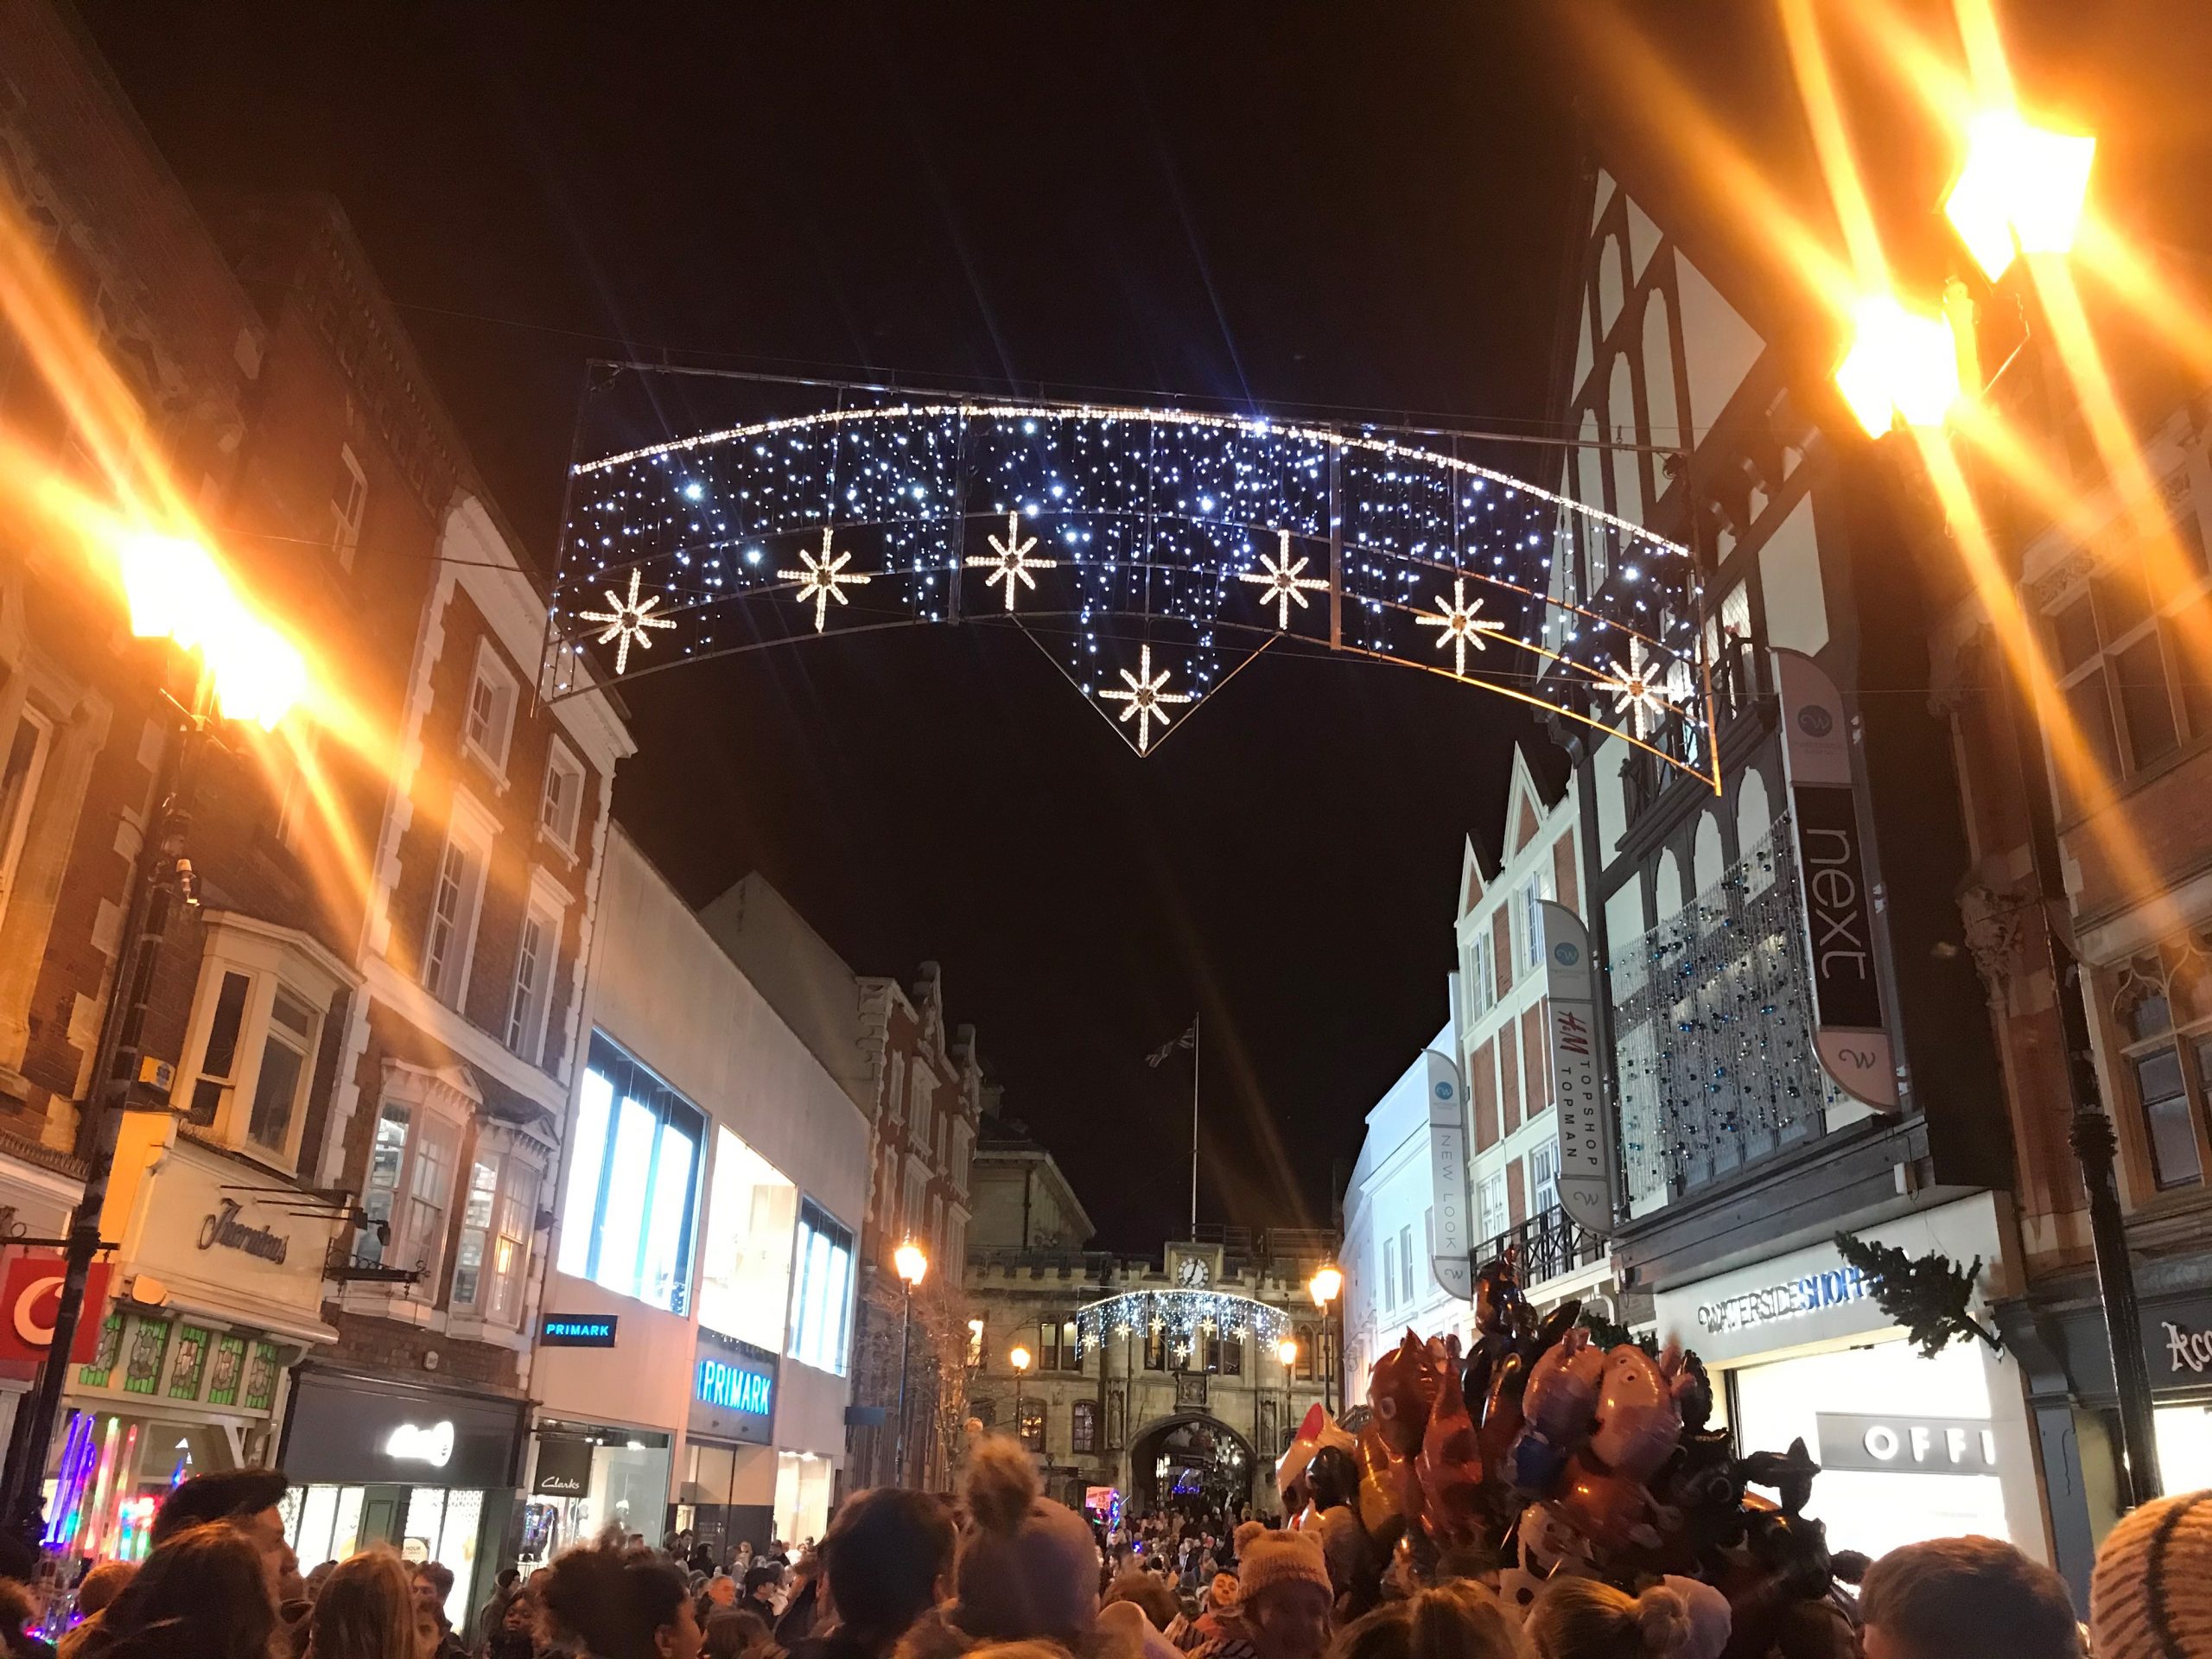 Lincoln Christmas lights have turned on!